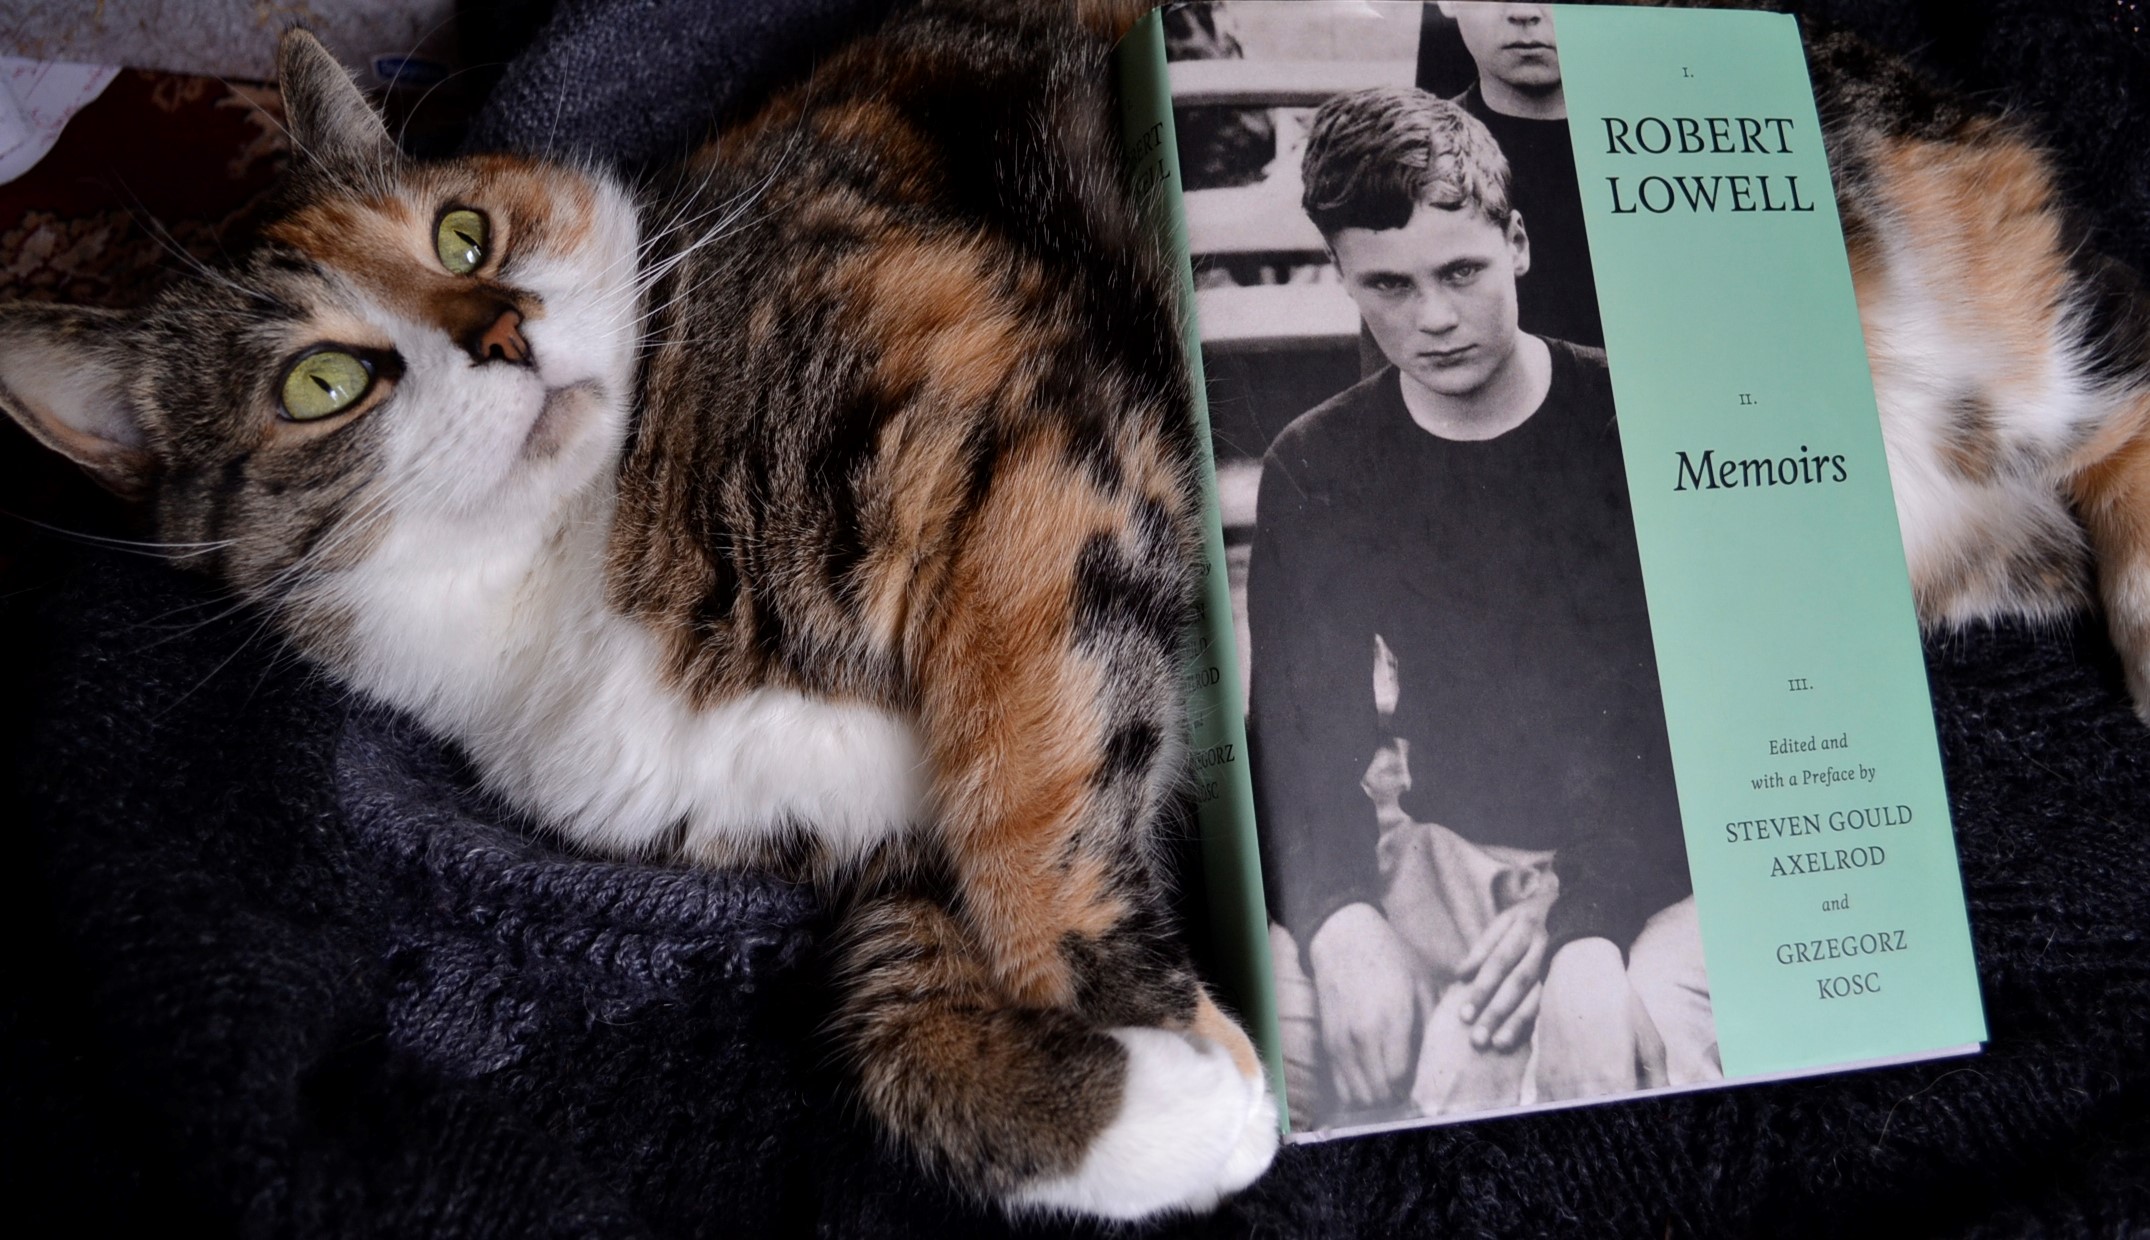 A calico tabby looks weirdly upwards. Robert Lowell's Memoirs lies on her stomach beside curled paws.